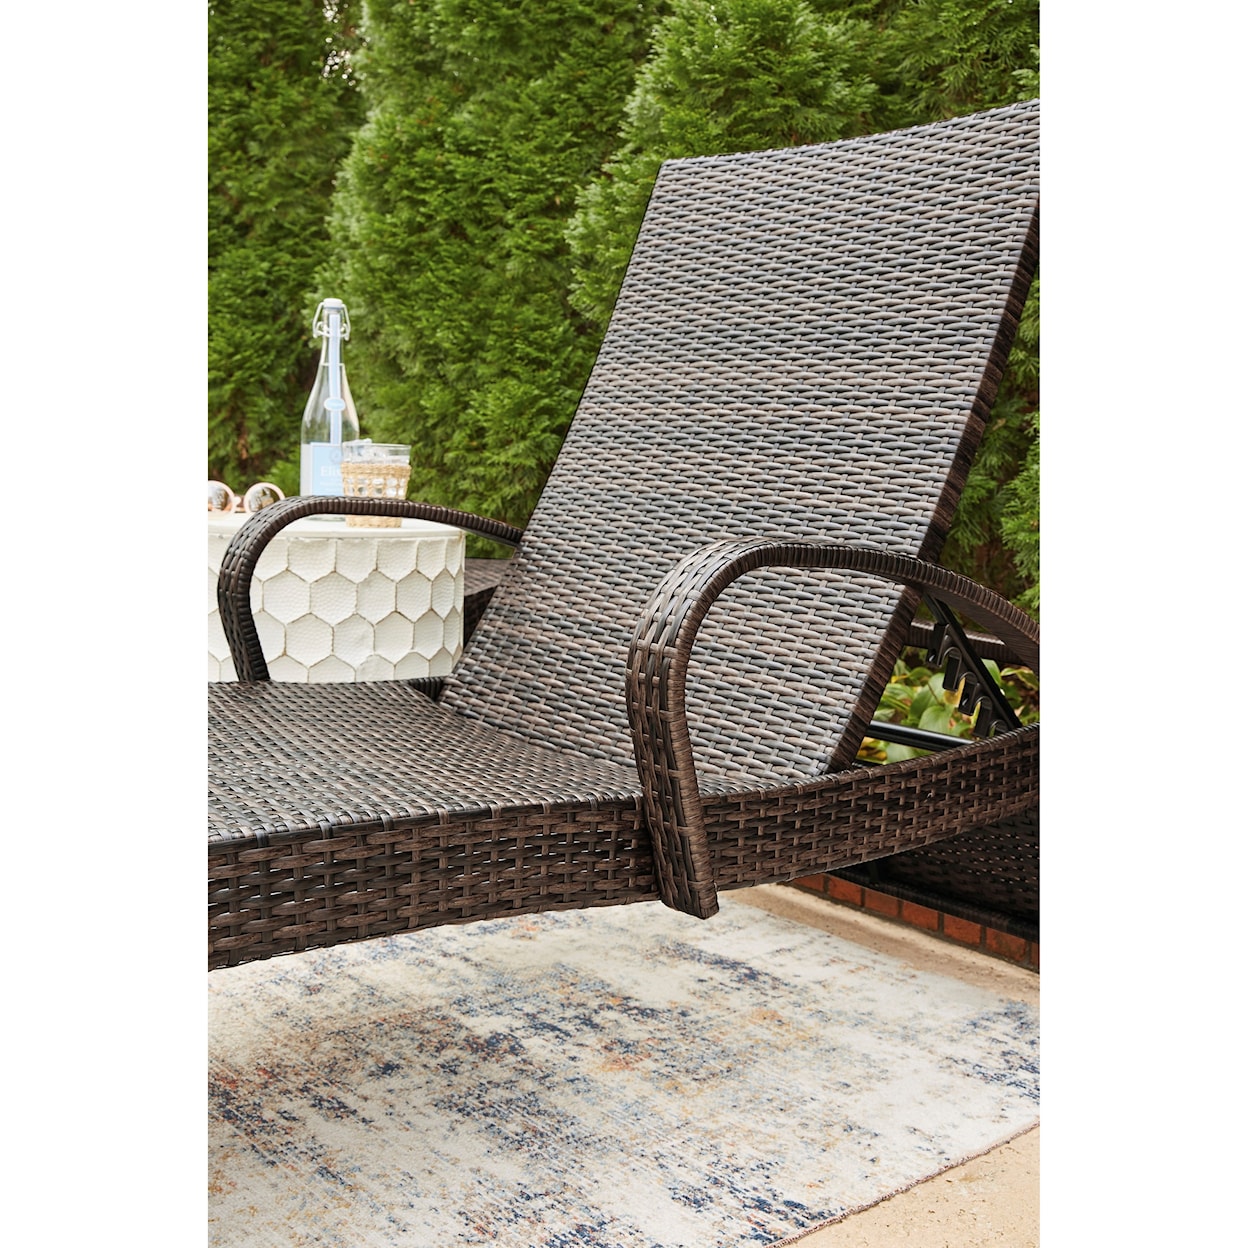 Signature Design by Ashley Kantana Set of 2 Chaise Lounges